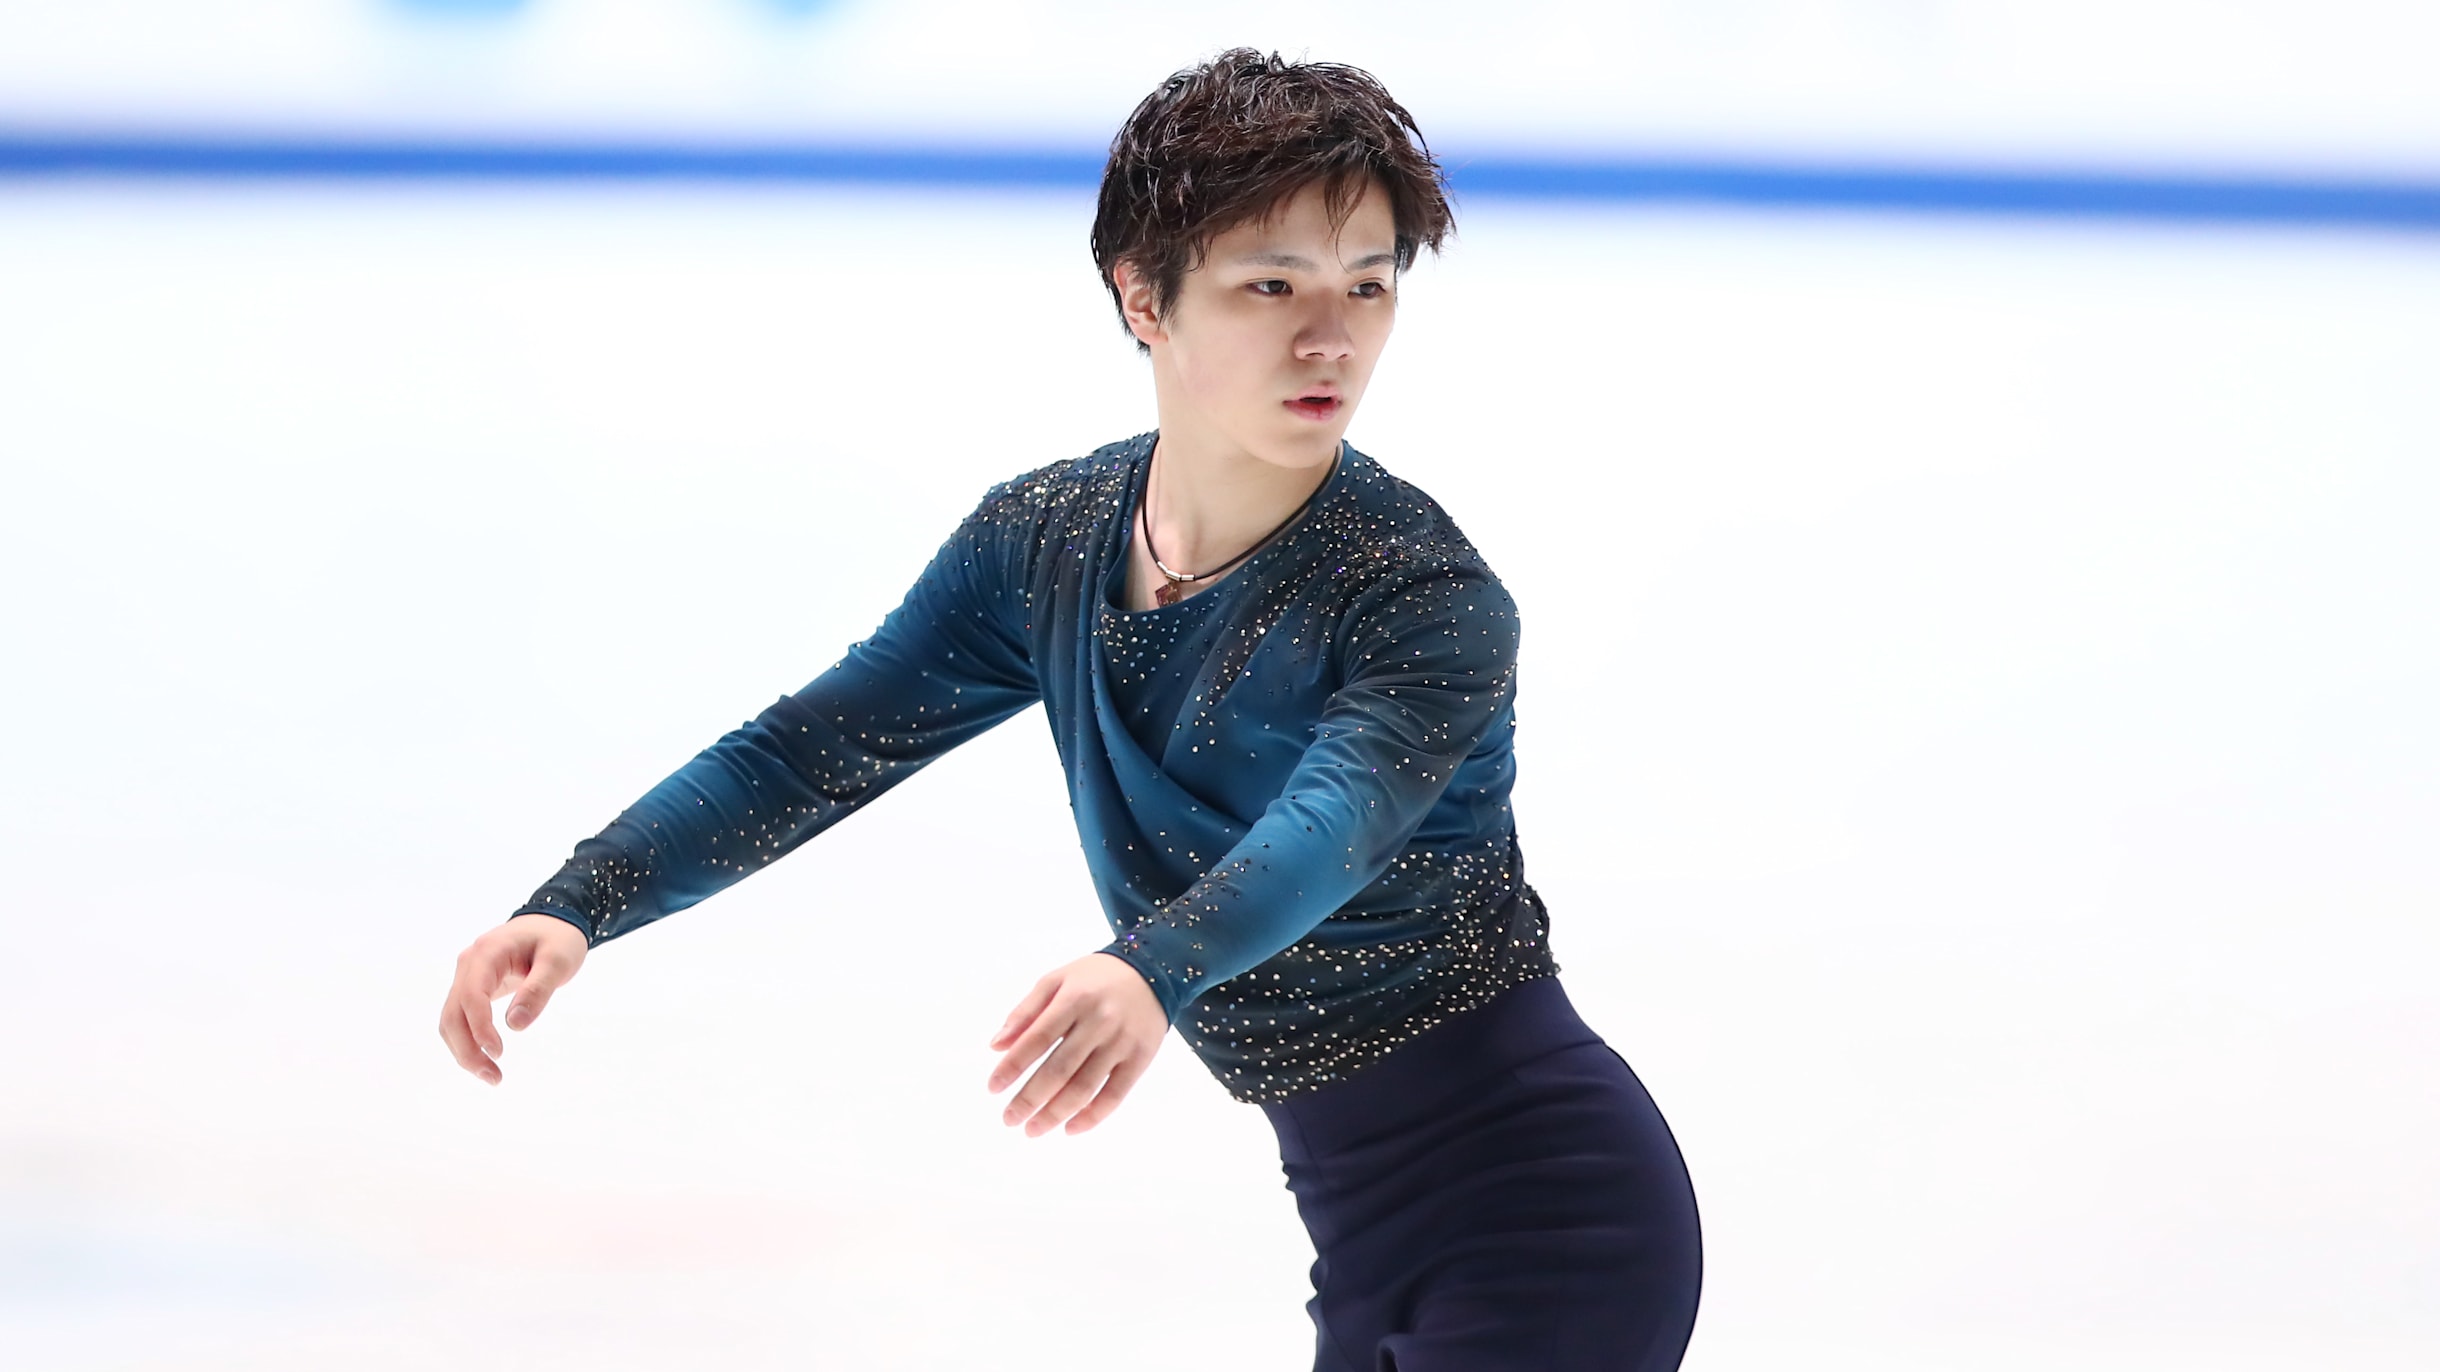 Shoma Uno produces world record free skate to claim Four Continents title